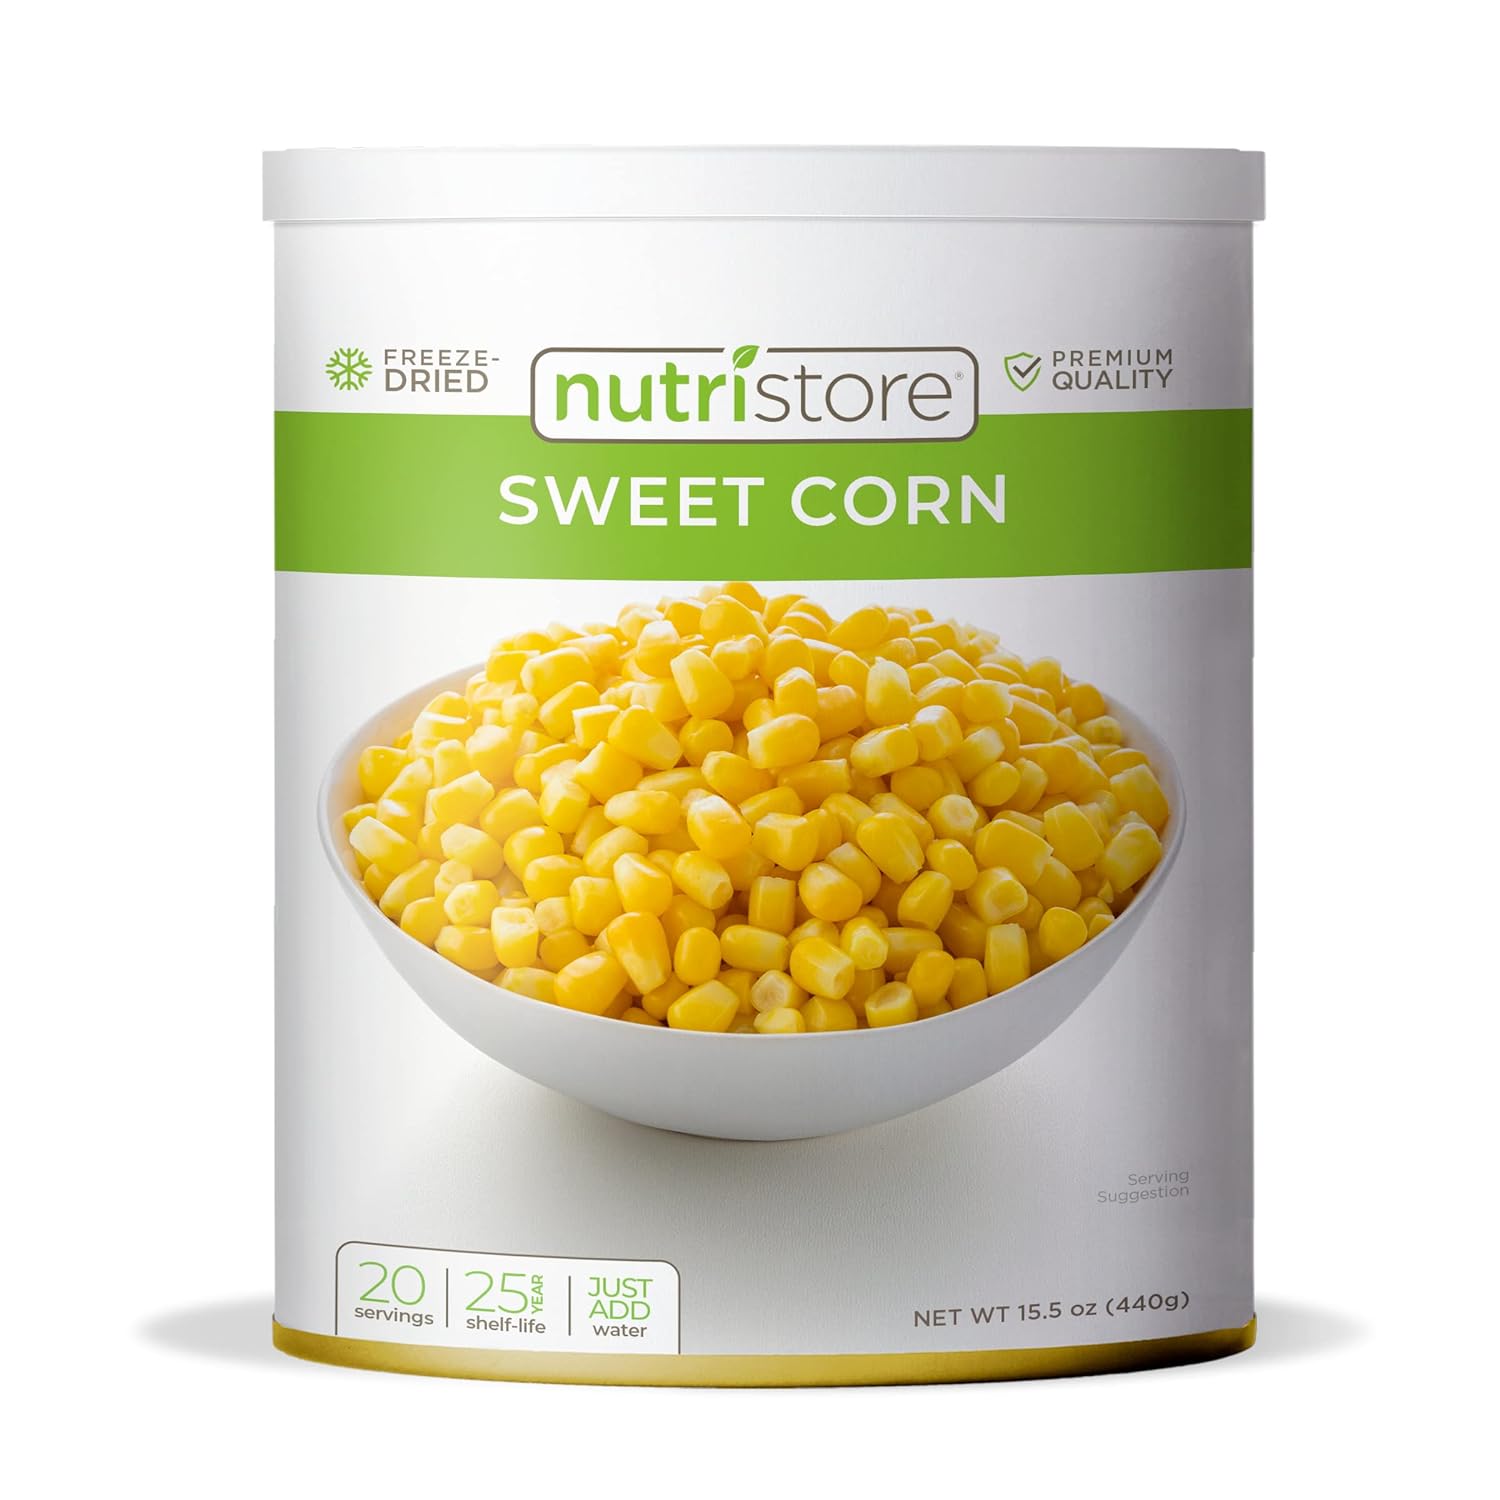 Nutristore Freeze Dried Corn | Premium Quality Vegetables for Healthy Snack or Long Term Storage | Emergency Survival Canned Food Supply | Bulk #10 Can Veggies | 25 Year Shelf Life | Made in USA